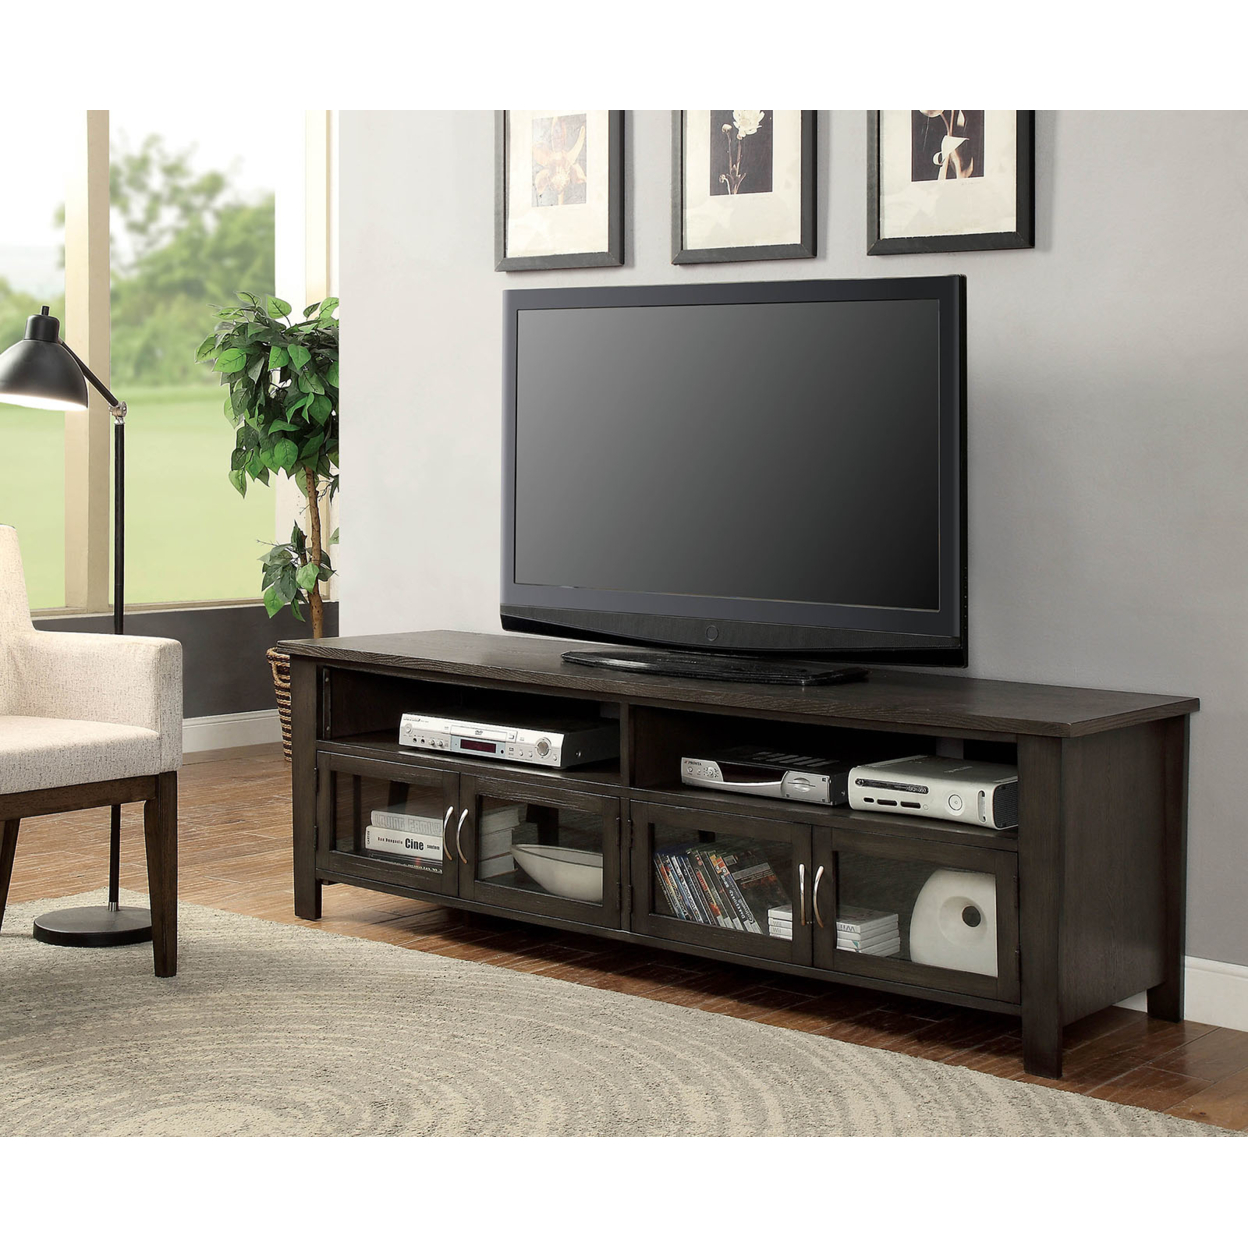 72 Wooden TV Stand With 2 Cabinets And 2 Open Shelves In Brown- Saltoro Sherpi